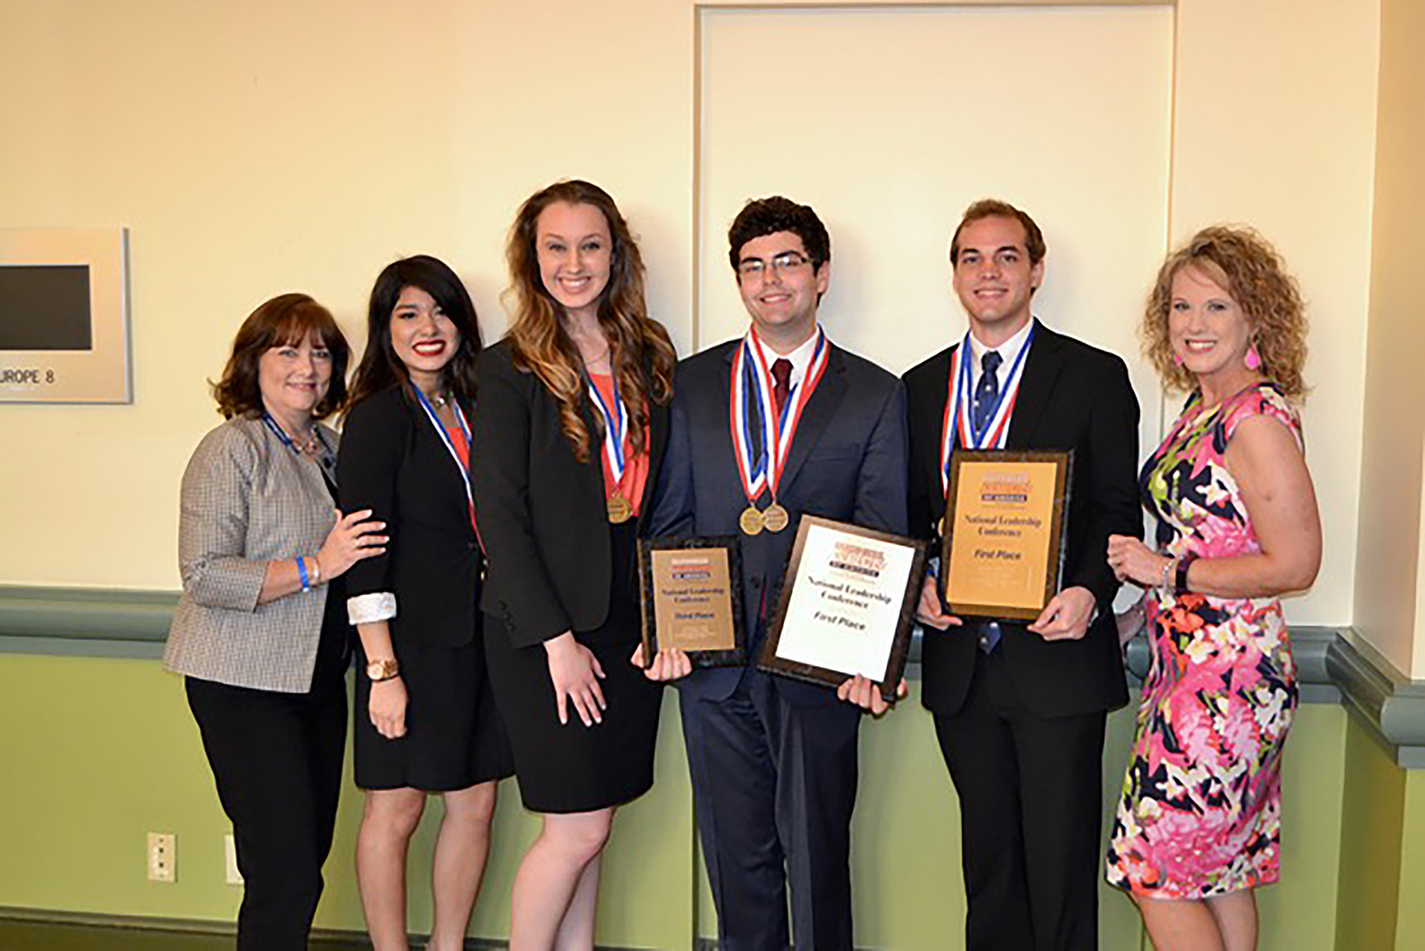 Business Professionals of America students competed at the National Leadership Conference in May and took home top honors in several categories.